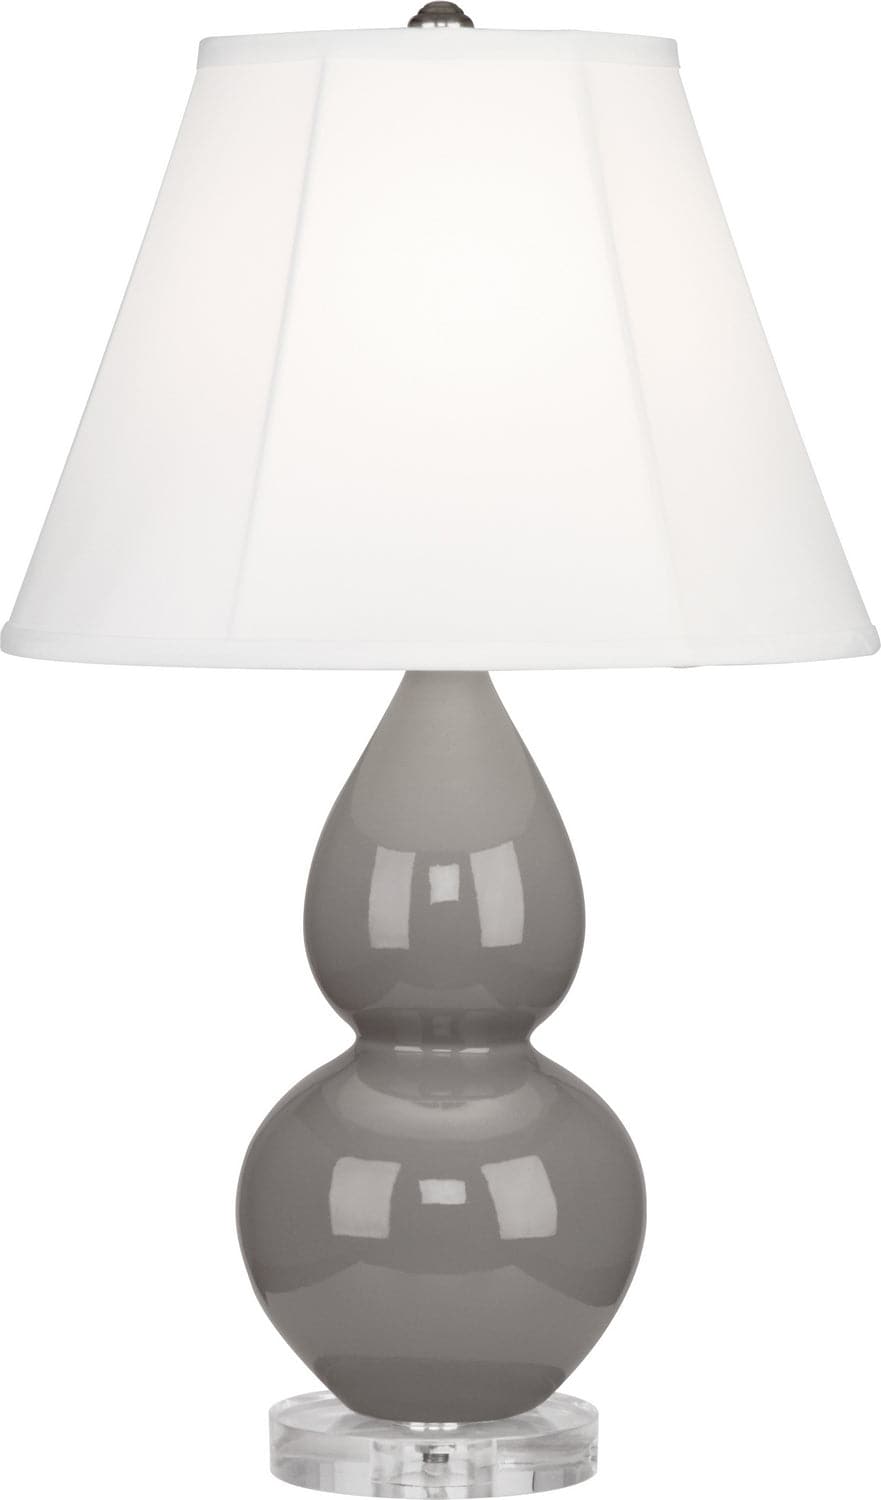 Robert Abbey - A770 - One Light Accent Lamp - Small Double Gourd - Smoky Taupe Glazed w/Lucite Base